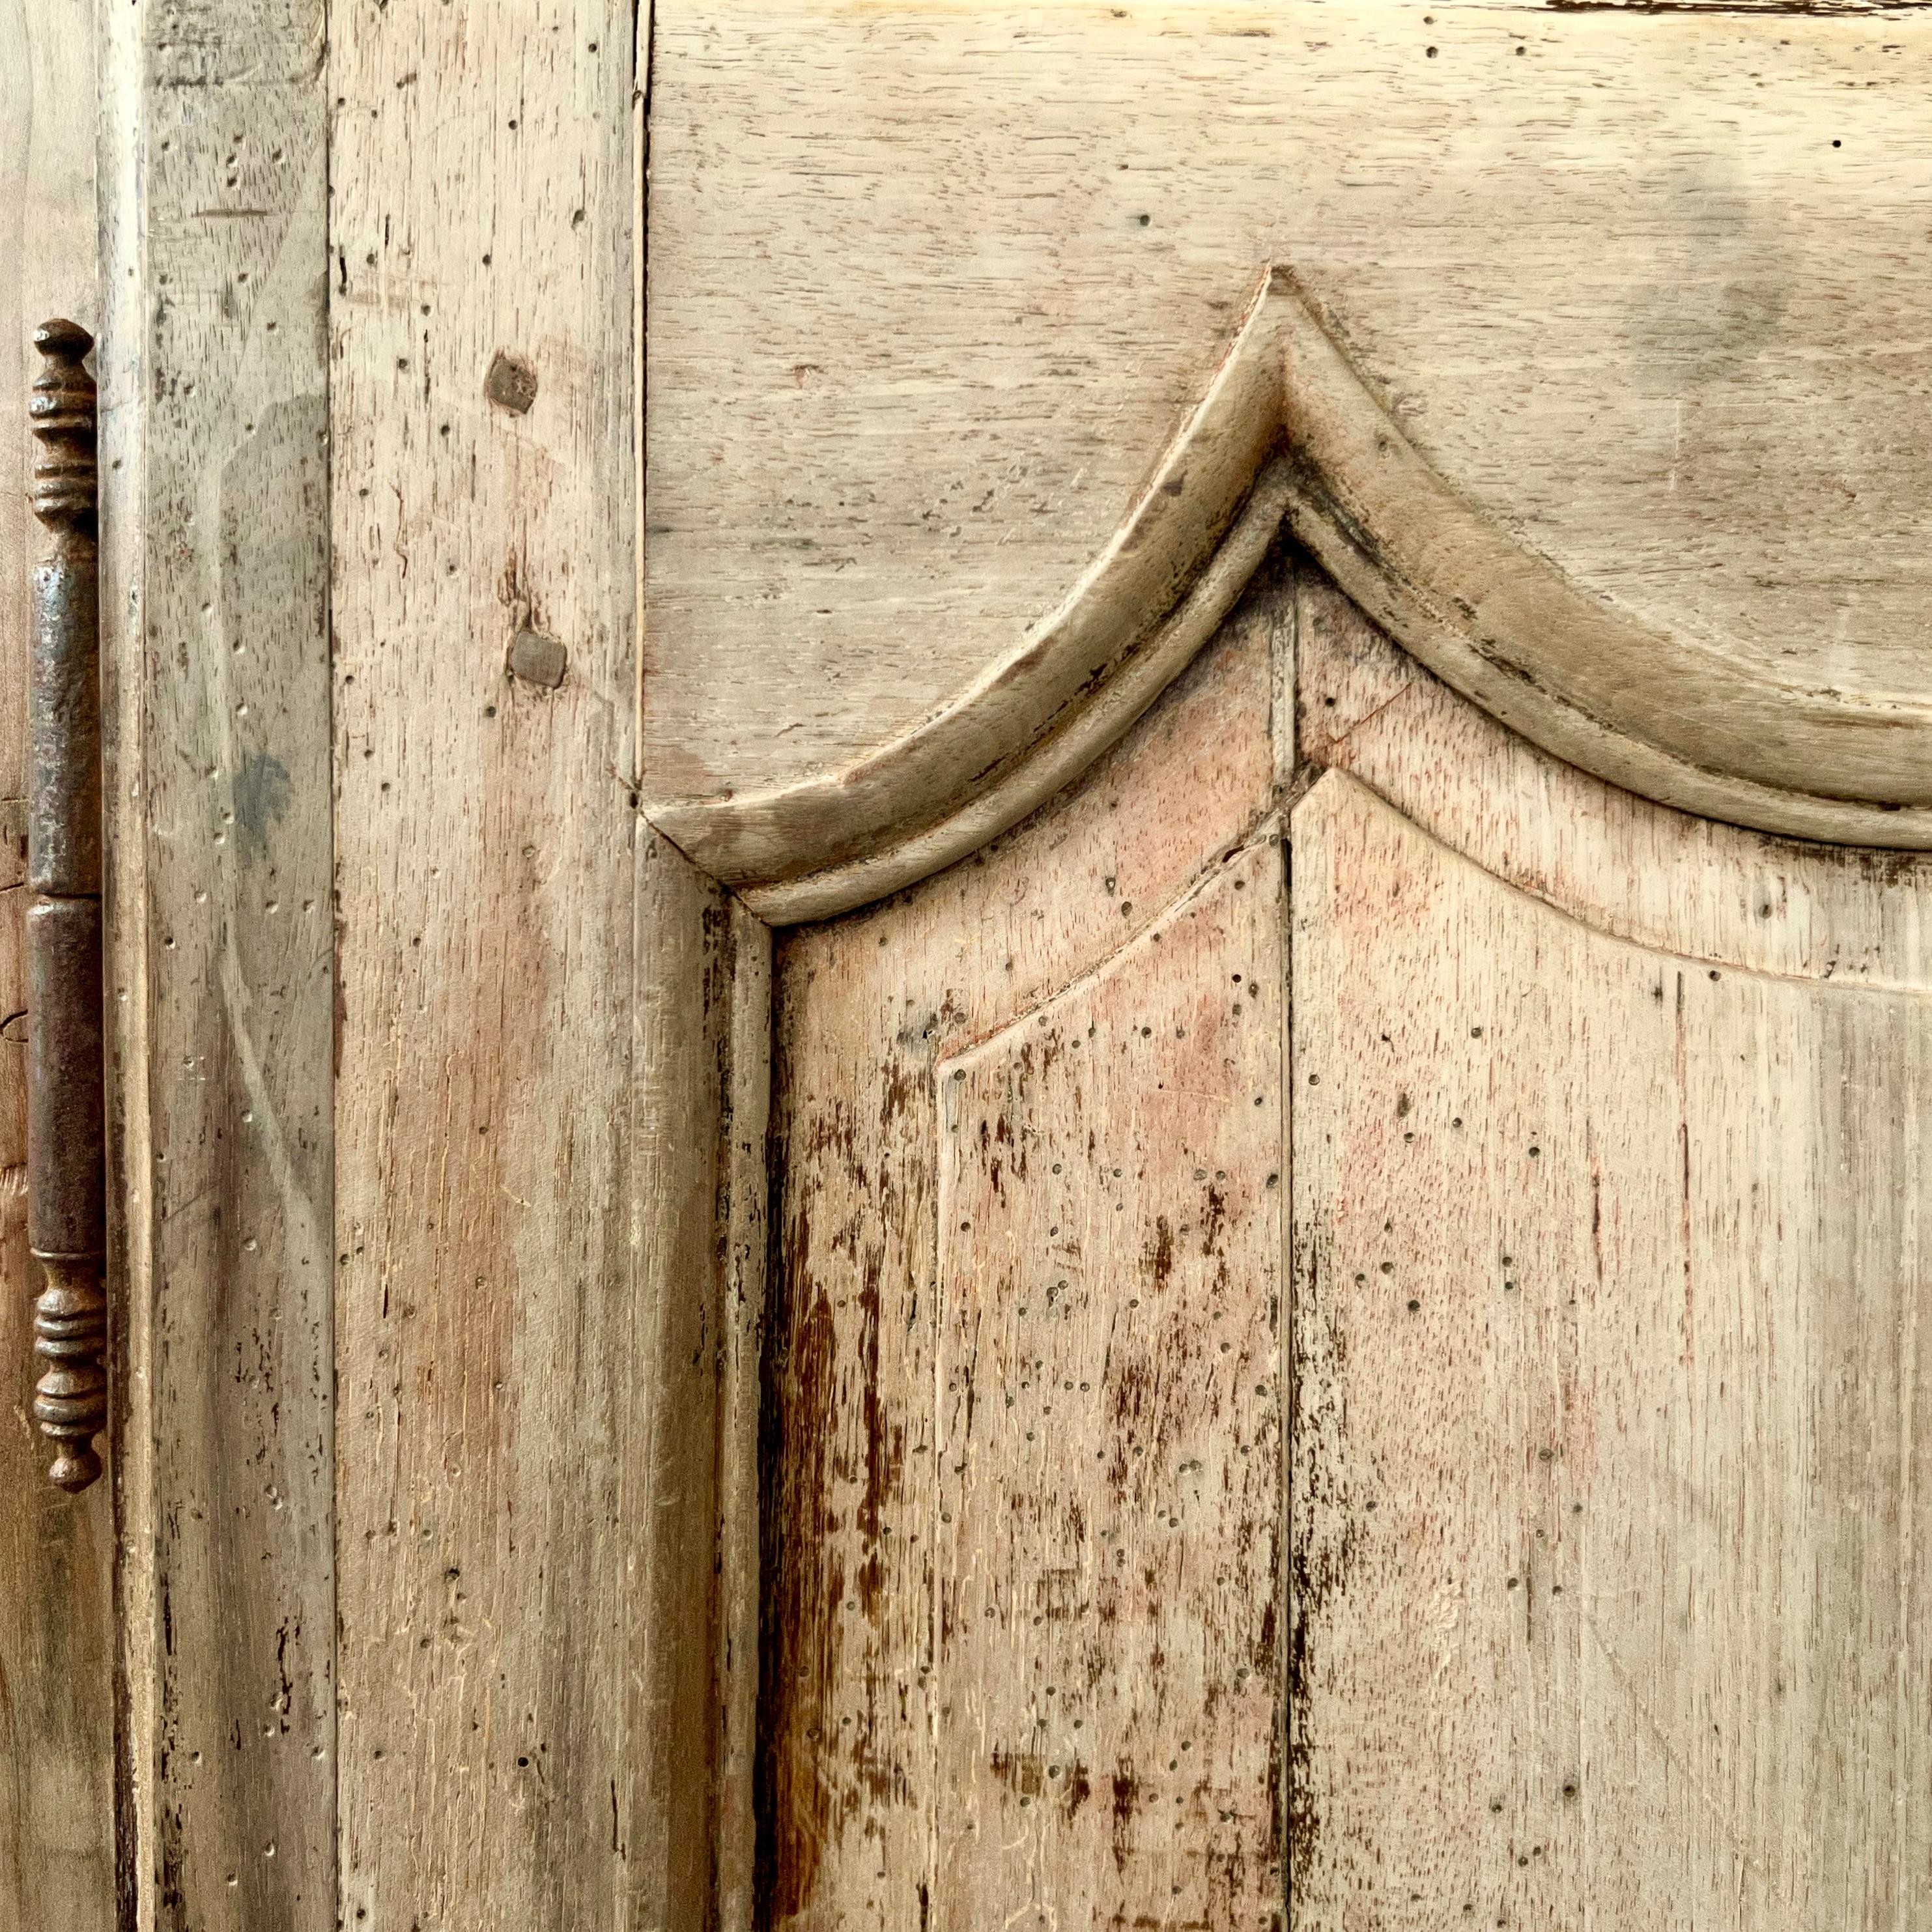 French 18th Century Oak Enfilade For Sale 3